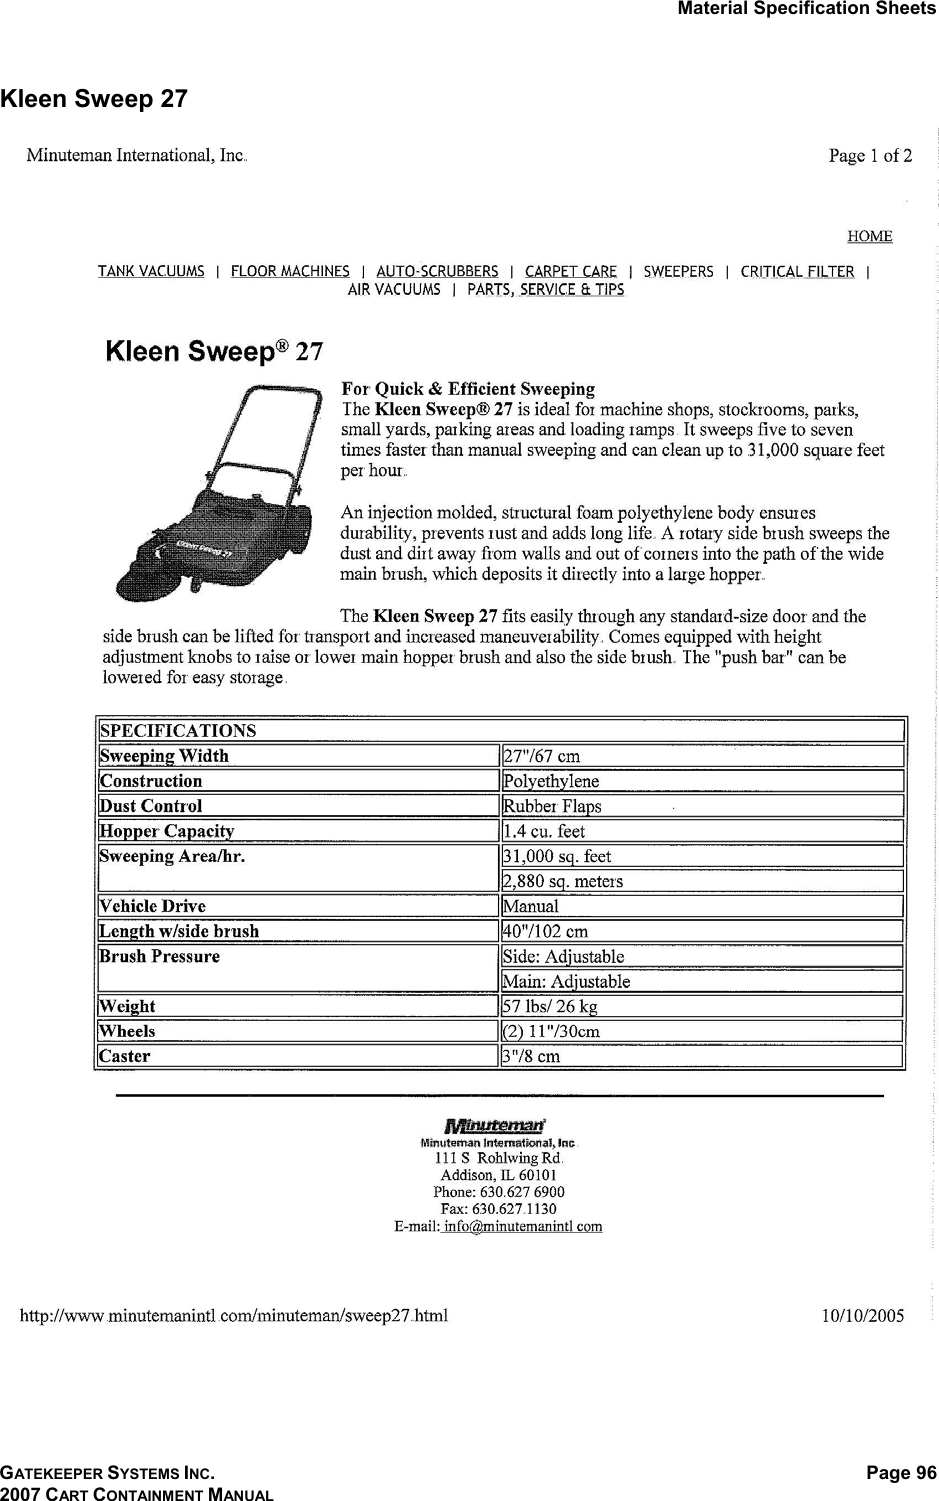 Material Specification Sheets GATEKEEPER SYSTEMS INC. 2007 CART CONTAINMENT MANUAL Page 96  Kleen Sweep 27    